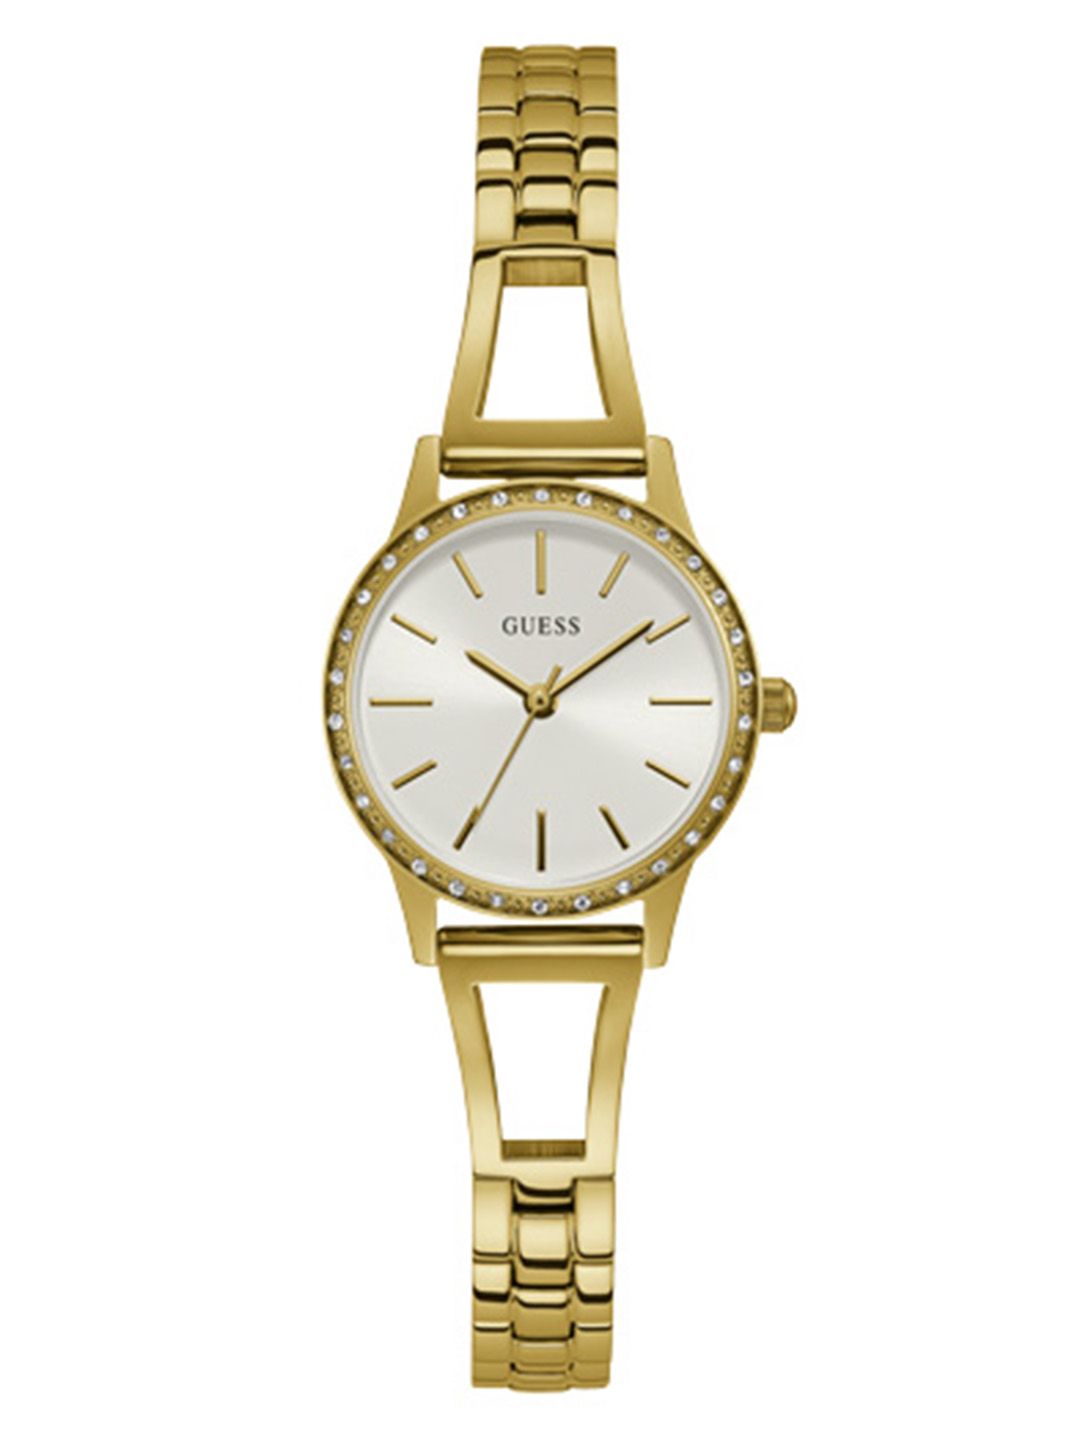 GUESS Women White Analogue Watch GW0025L2 Price in India